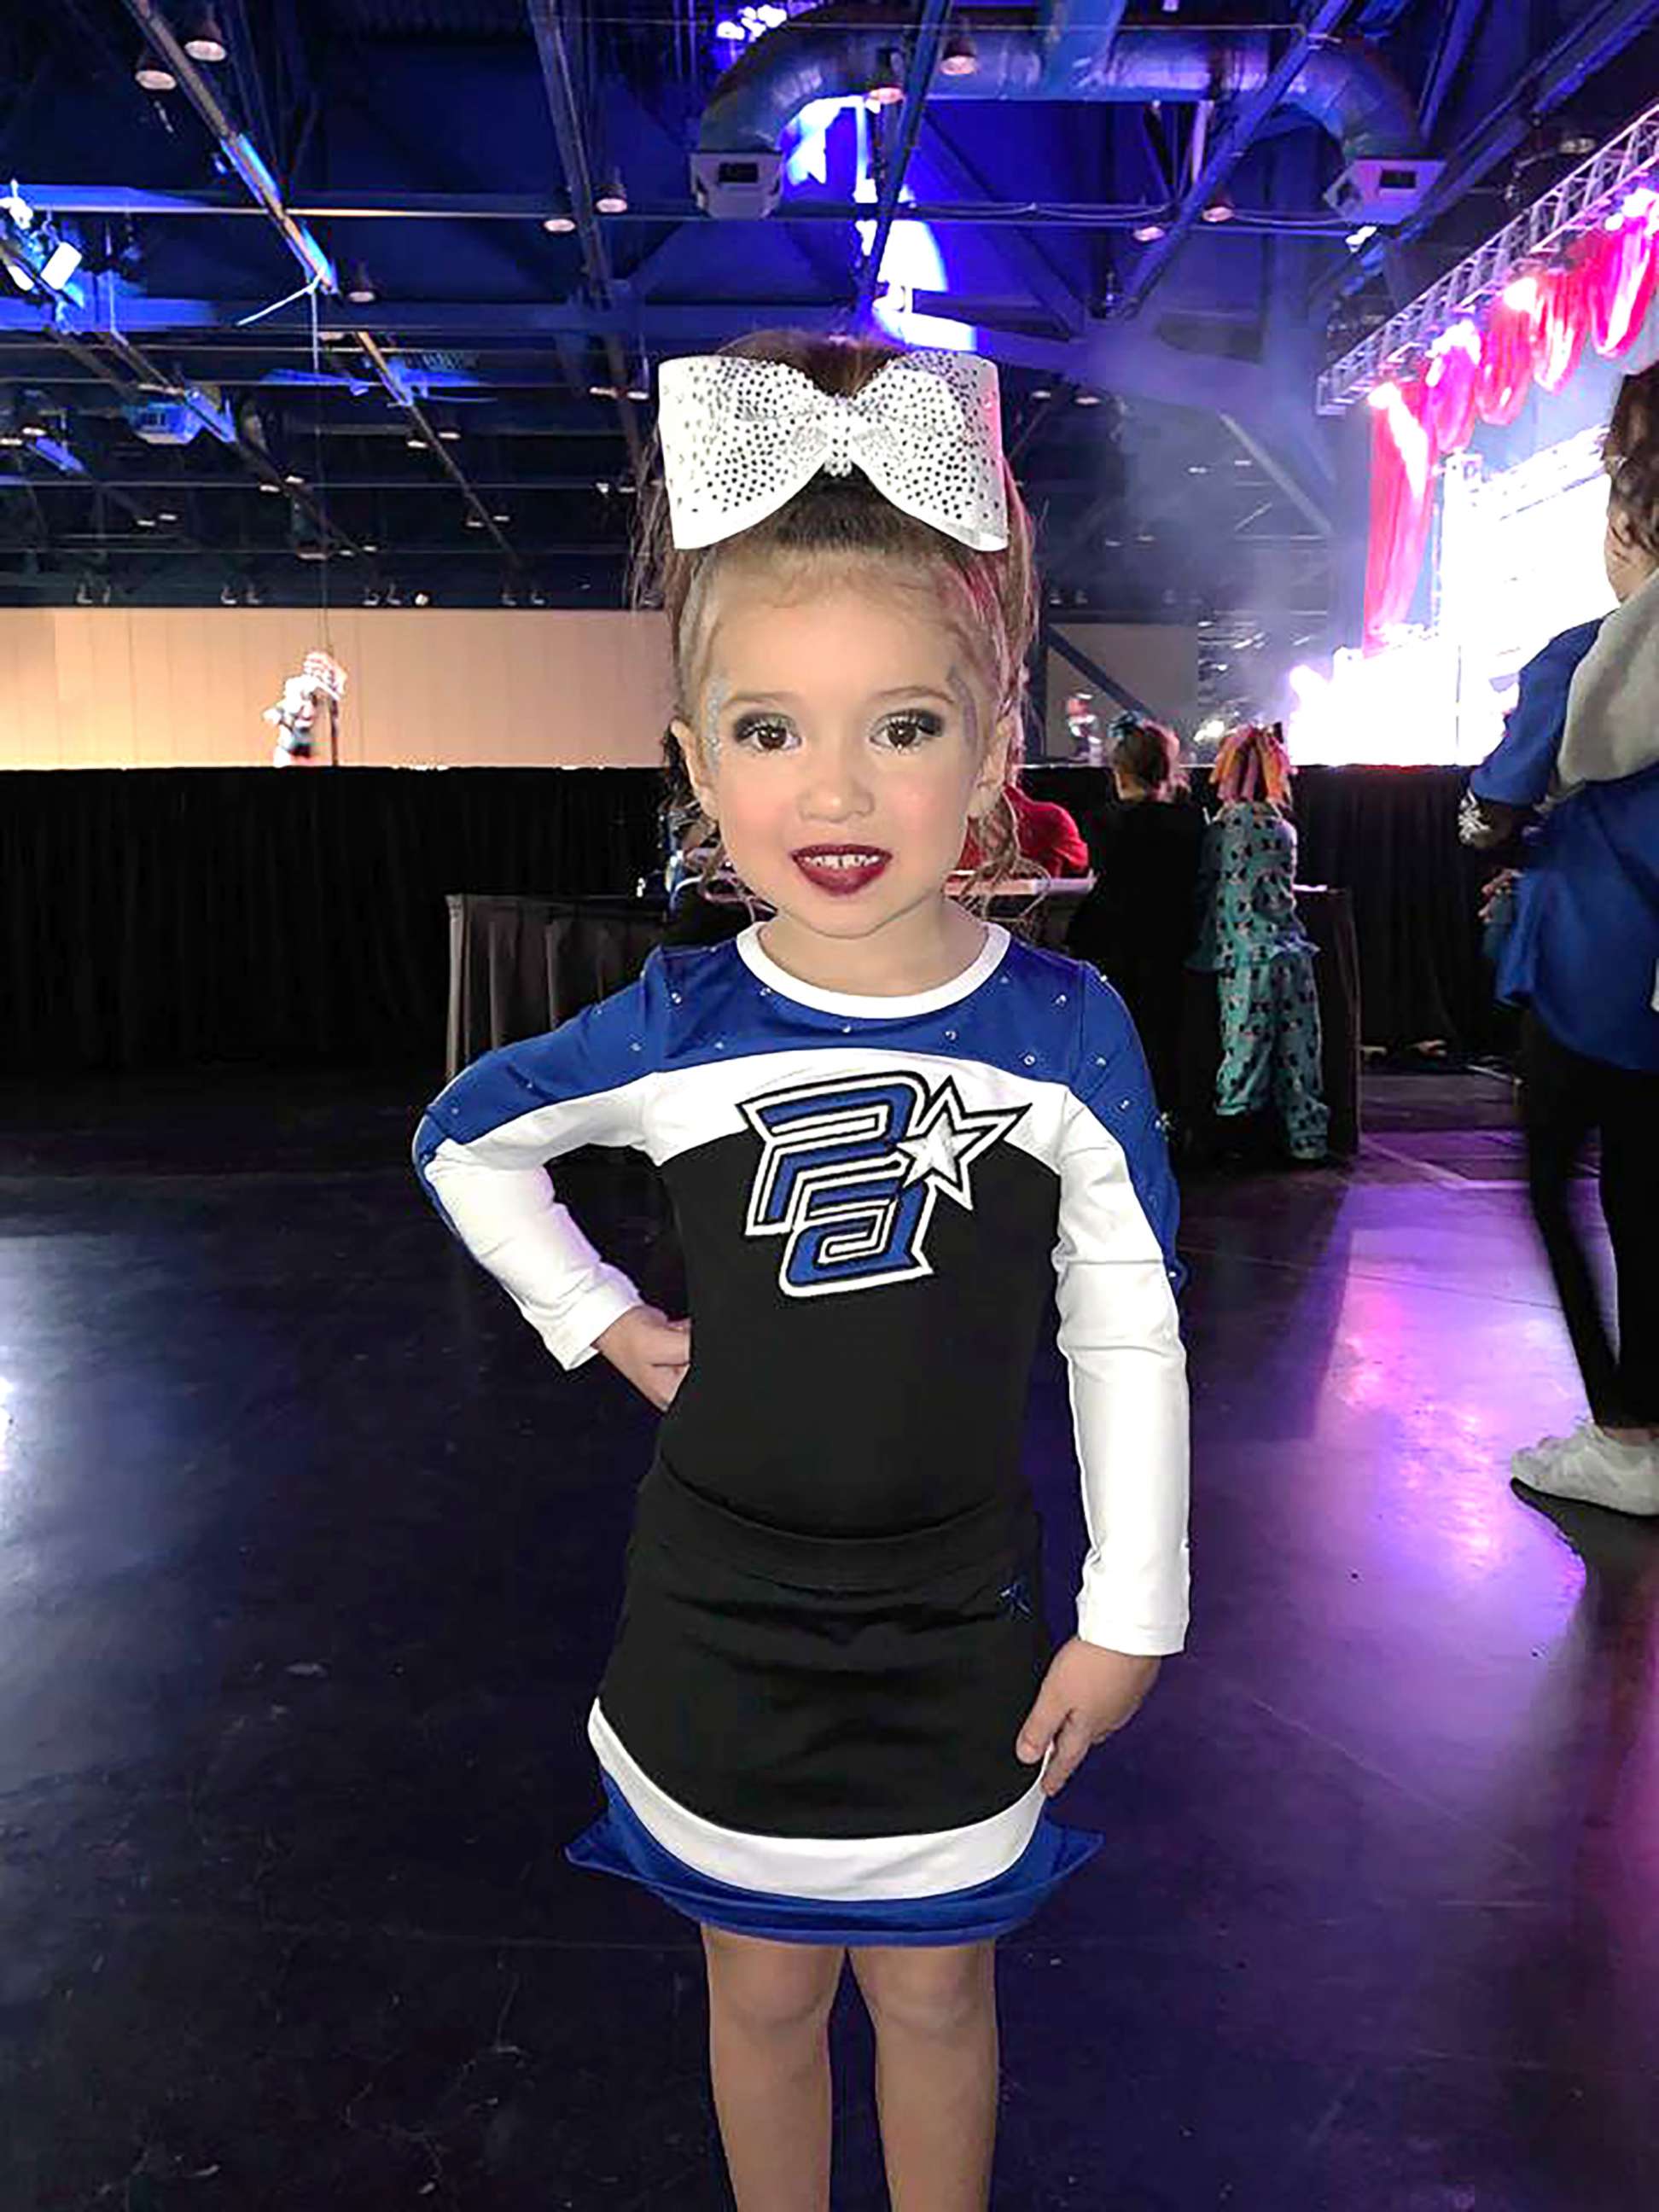 PHOTO: Kynzee Bryan, 4, is known in her community for her talented cheerleading skills.